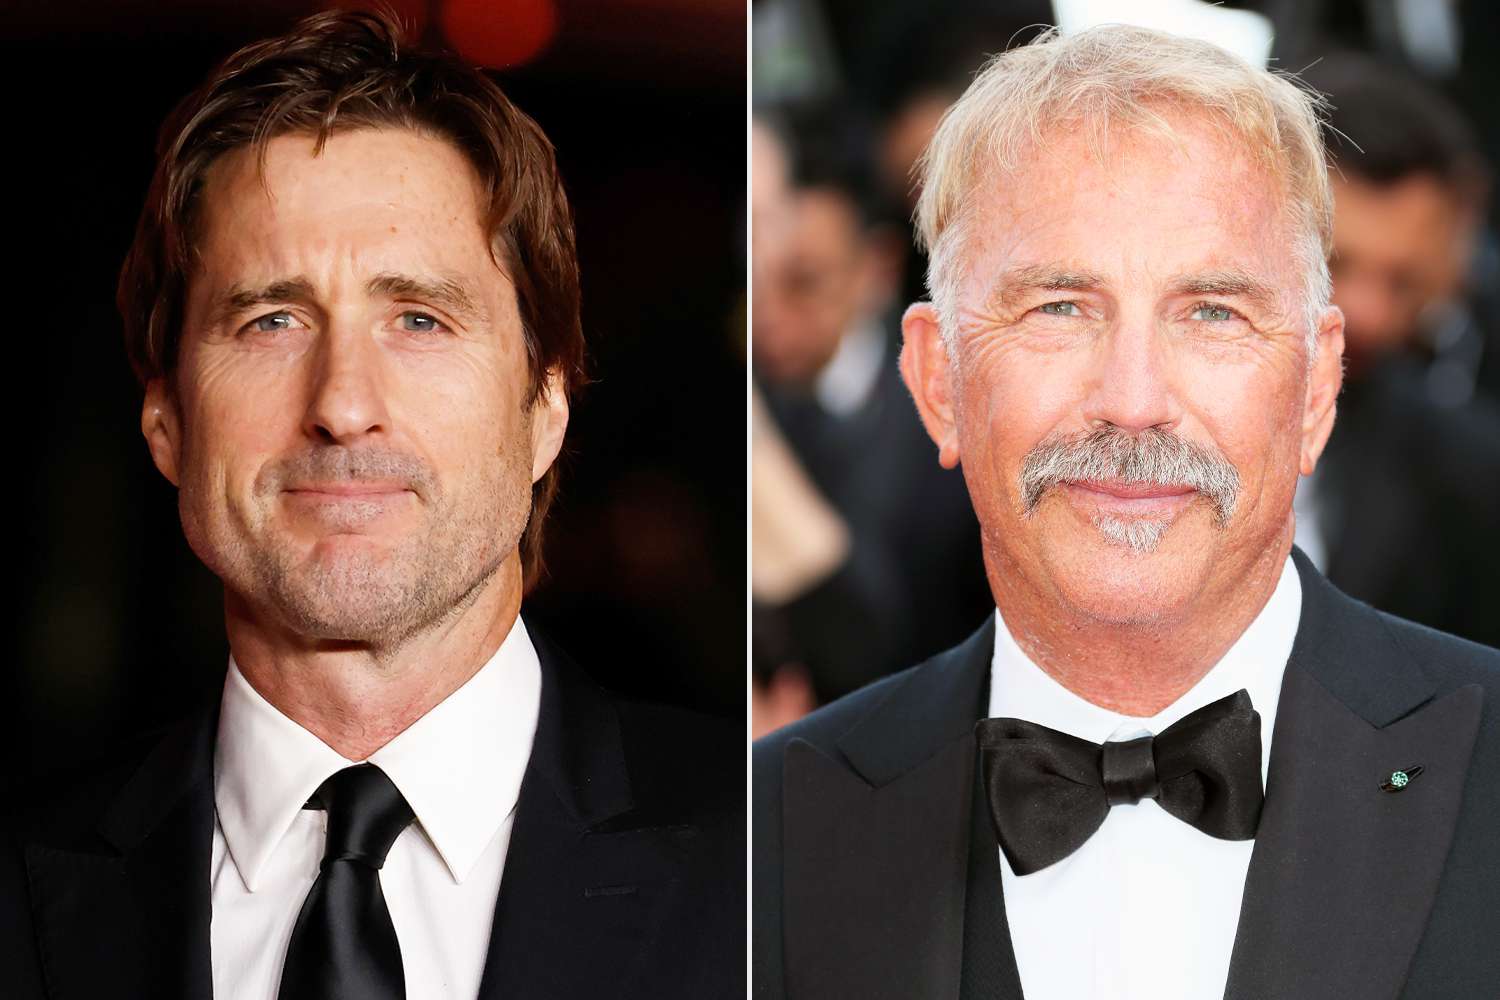 Why Luke Wilson Wasn’t Sure Kevin Costner Had Cast Him in “Horizon”: It ‘Completely Threw Me Off’ (Exclusive)